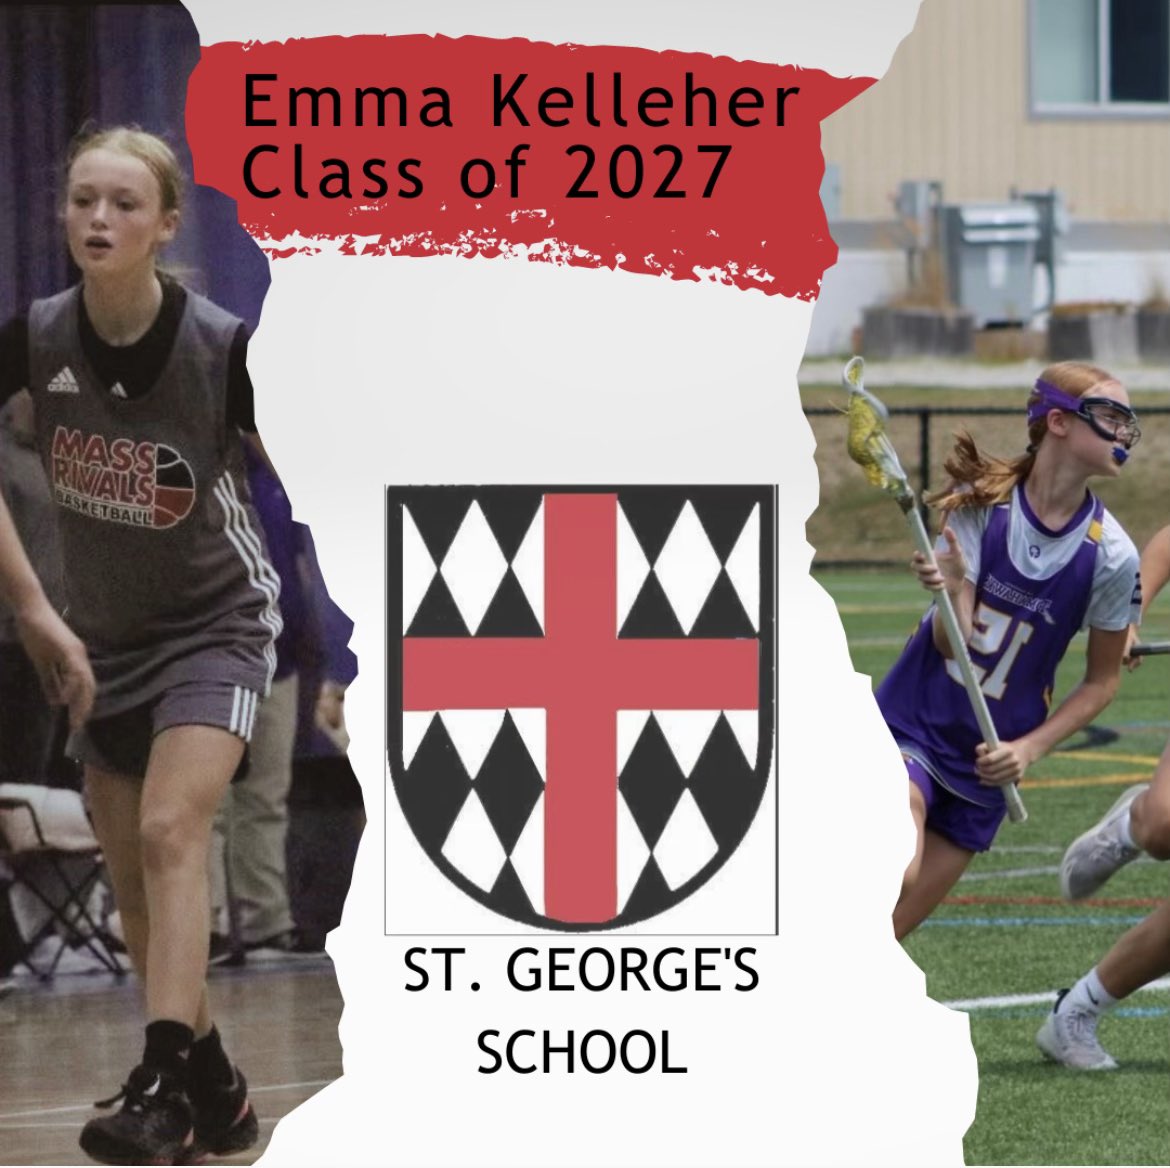 I’m excited to attend St. George’s School as a student-athlete! I look forward to playing for Coach Healy and Coach Ingraham! @SGgirlshoops @CoachLivHealy @LadyRivals @IAMCoachU1 @RivalsCoachJM #SggLax #NHTomahawks #RivalsWay